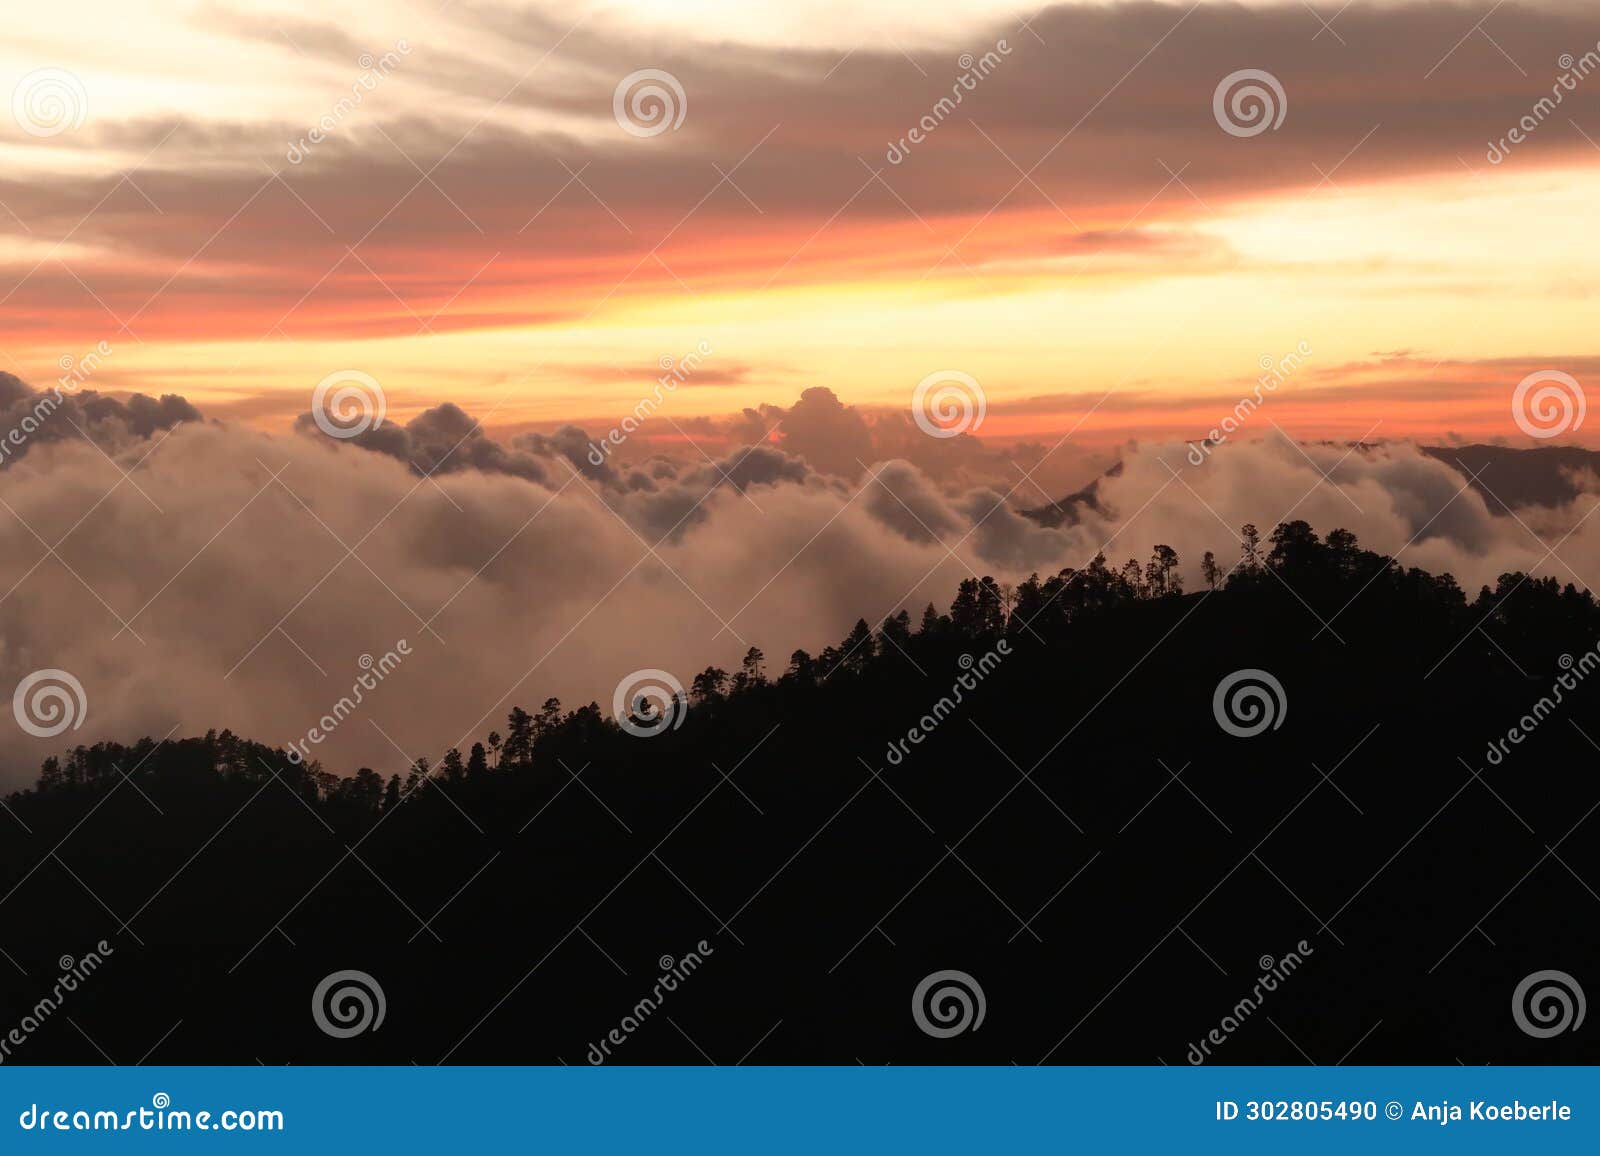 the landscape around san jose del pacifico at sunset, clouds, hills and a colorful sky, oaxaca, mexico